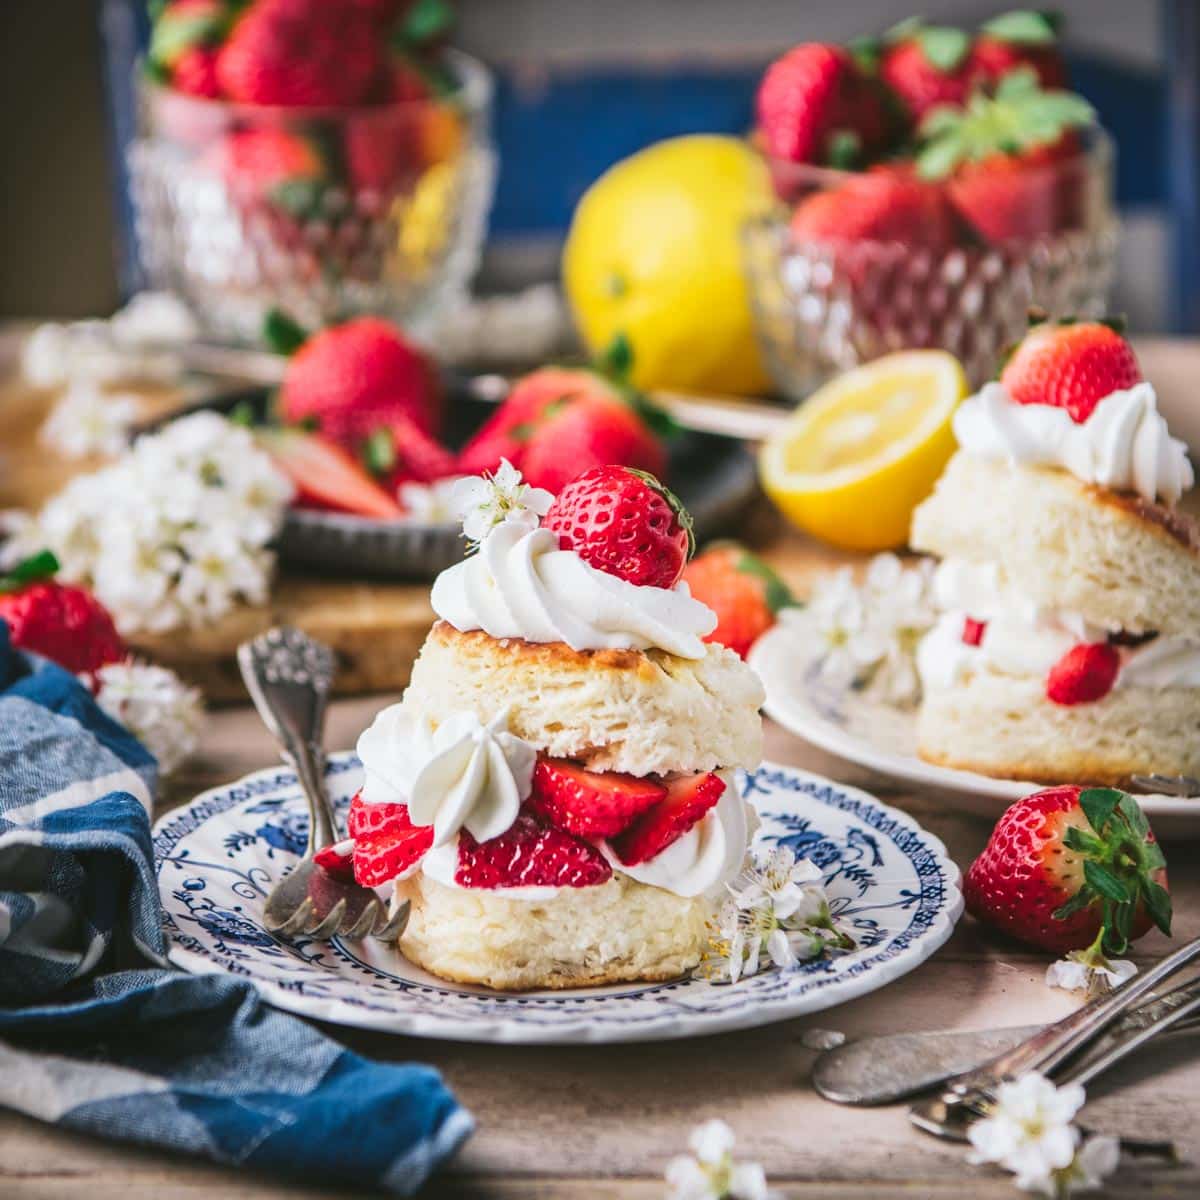 Table of strawberry shortcake with fresh berries and lemons in the background.